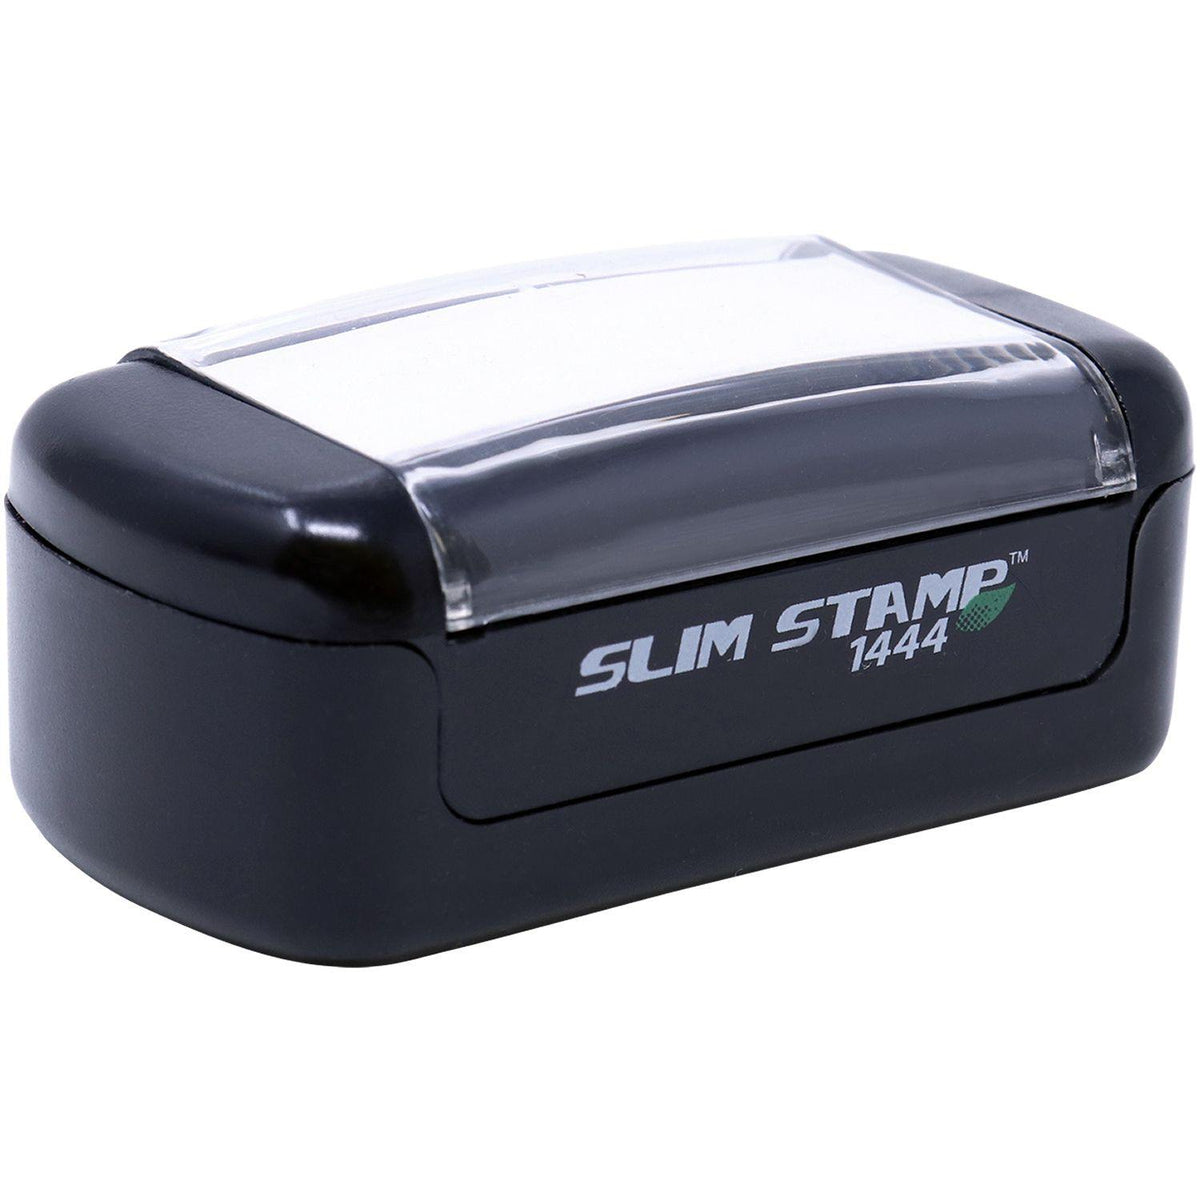 Slim Pre-Inked Bold Fragile Stamp - Engineer Seal Stamps - Brand_Slim, Impression Size_Small, Stamp Type_Pre-Inked Stamp, Type of Use_General, Type of Use_Postal &amp; Mailing, Type of Use_Shipping &amp; Receiving